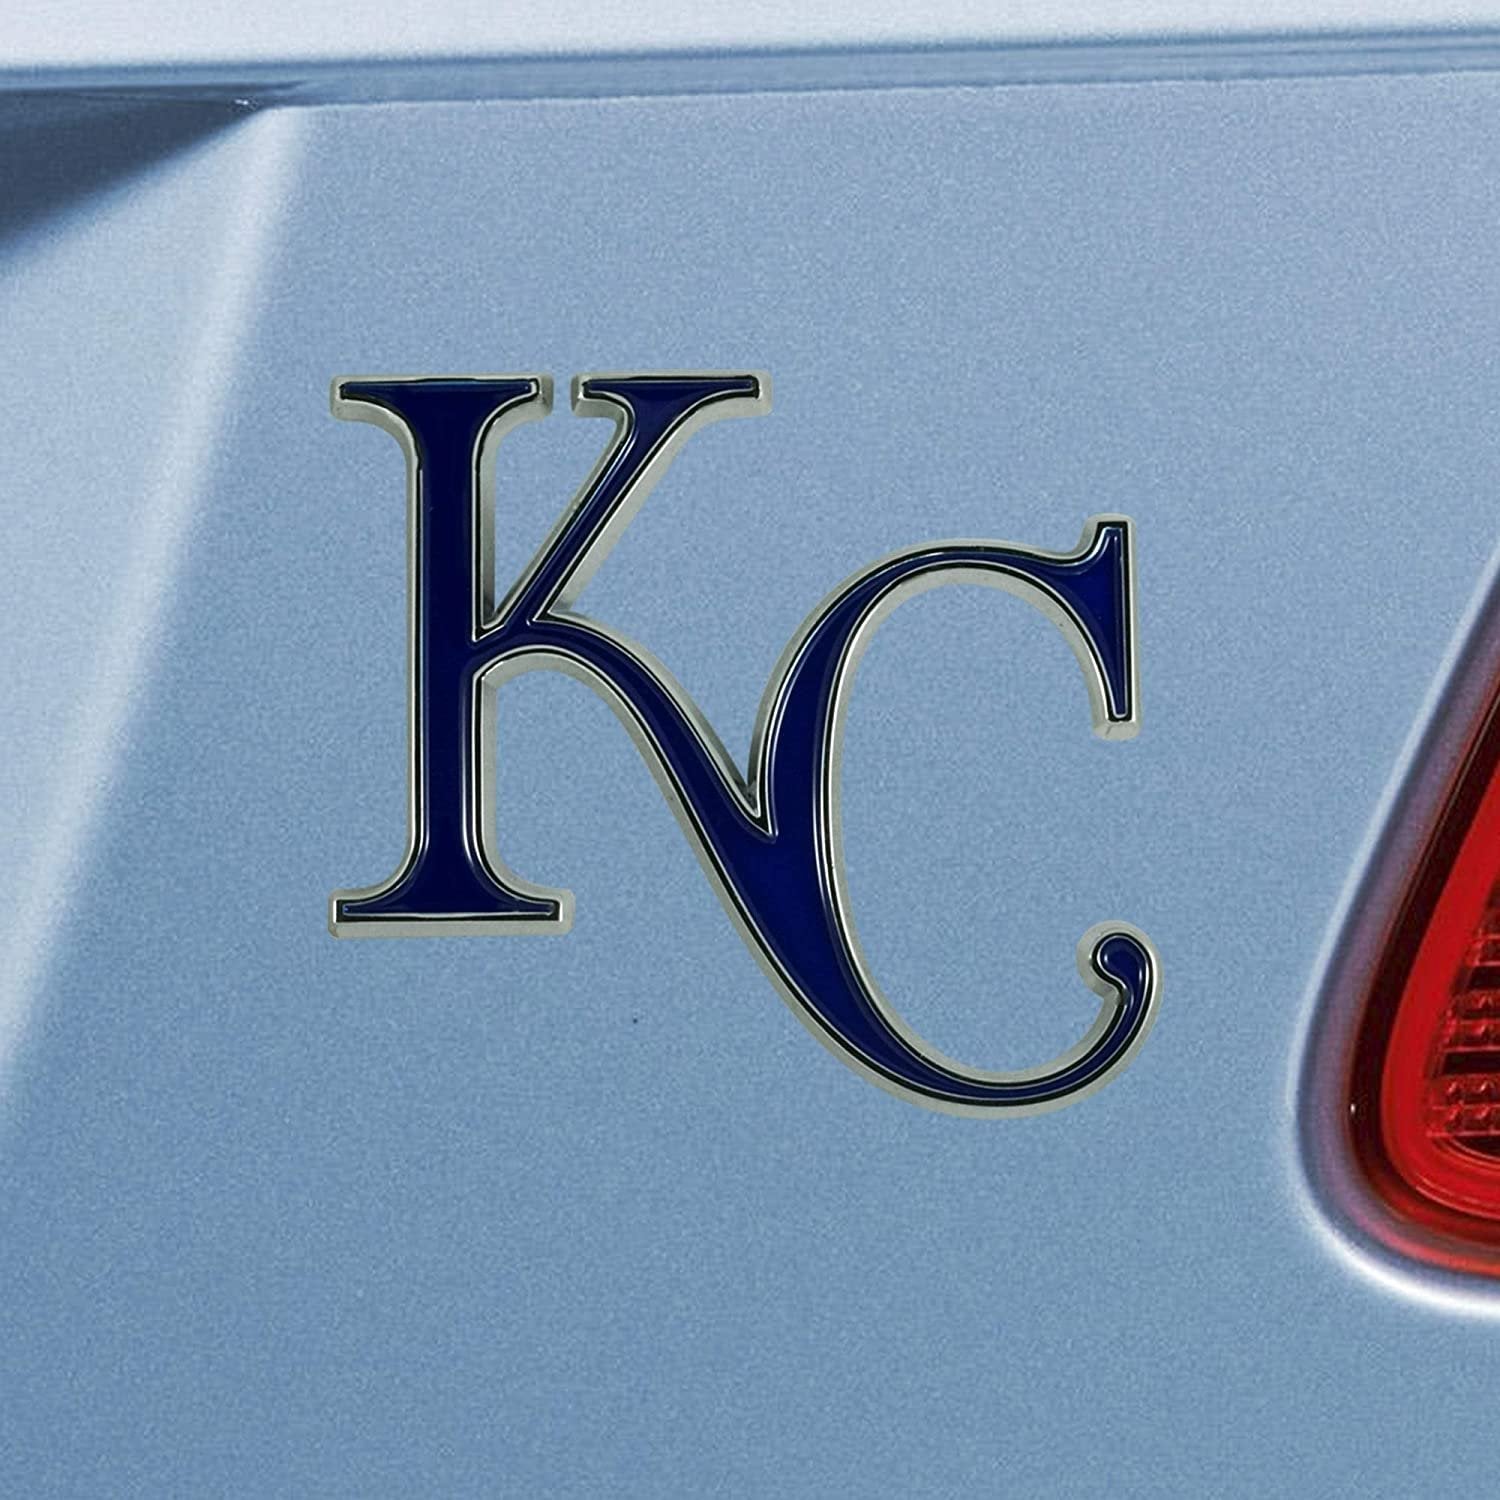 Kansas City Royals Solid Metal Color Auto Emblem Raised Decal Adhesive Tape Backing